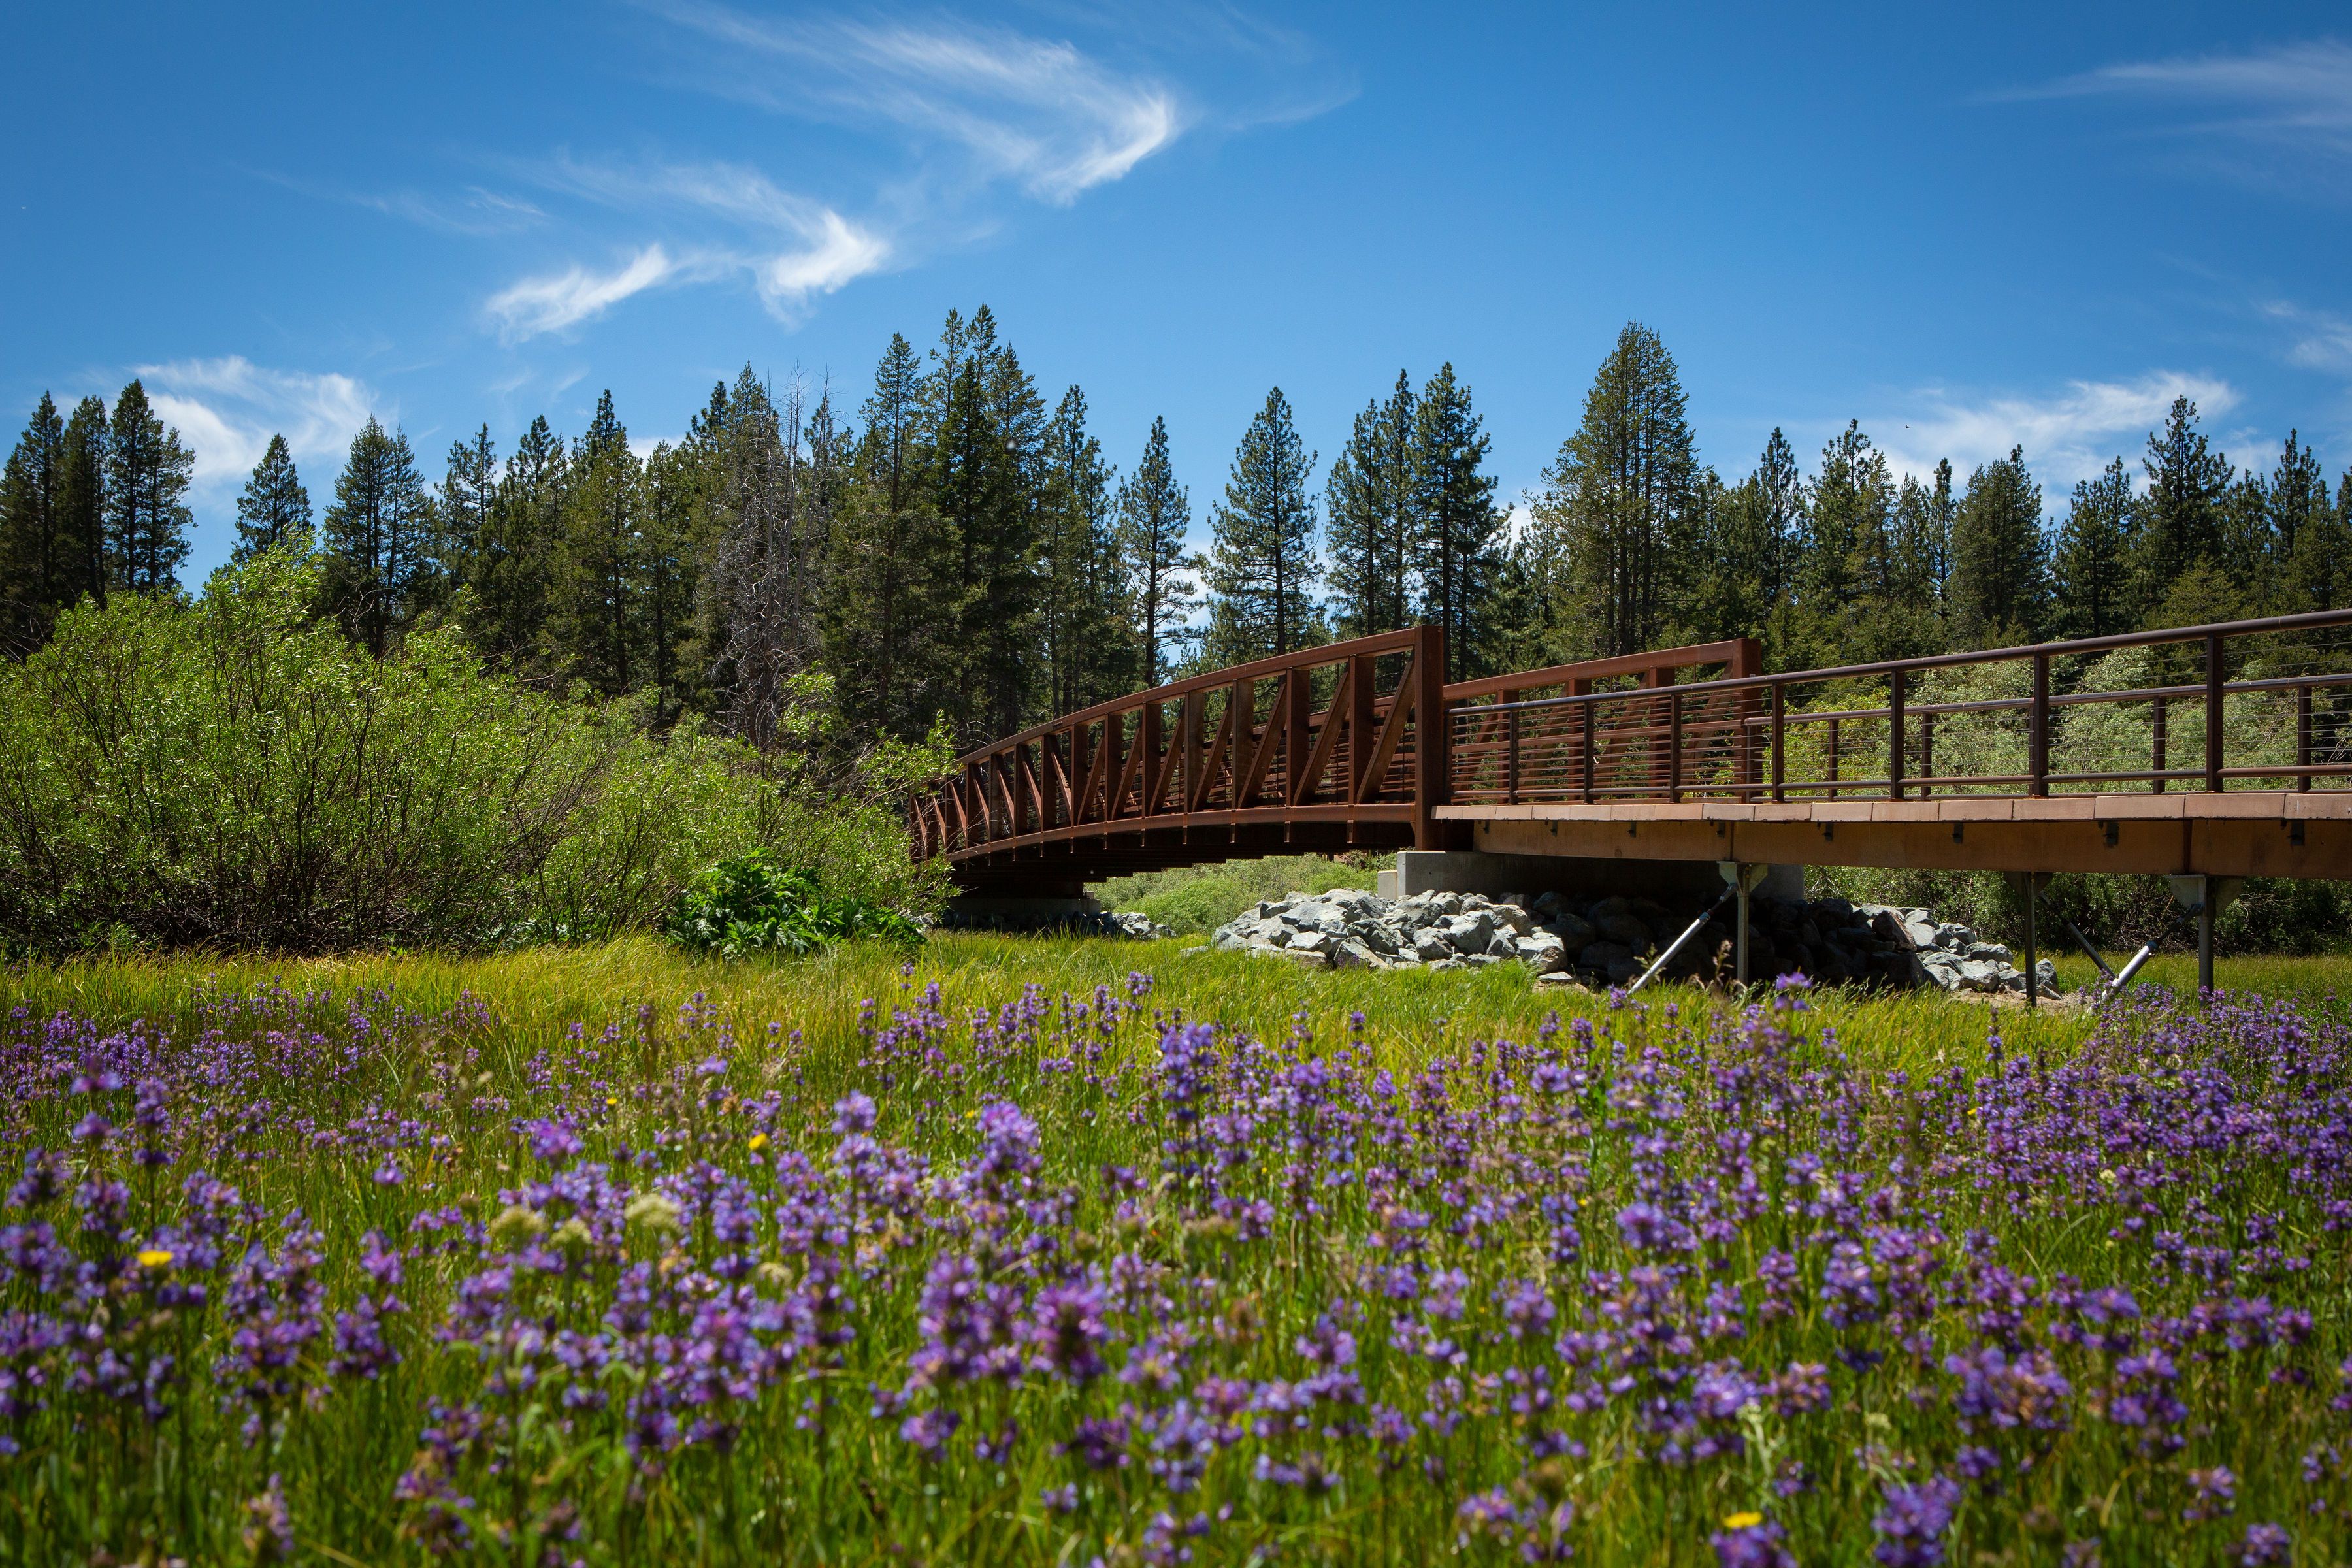 LTCC, Tahoe Conservancy Celebrate Completion of Critical Portion of Greenway Trail